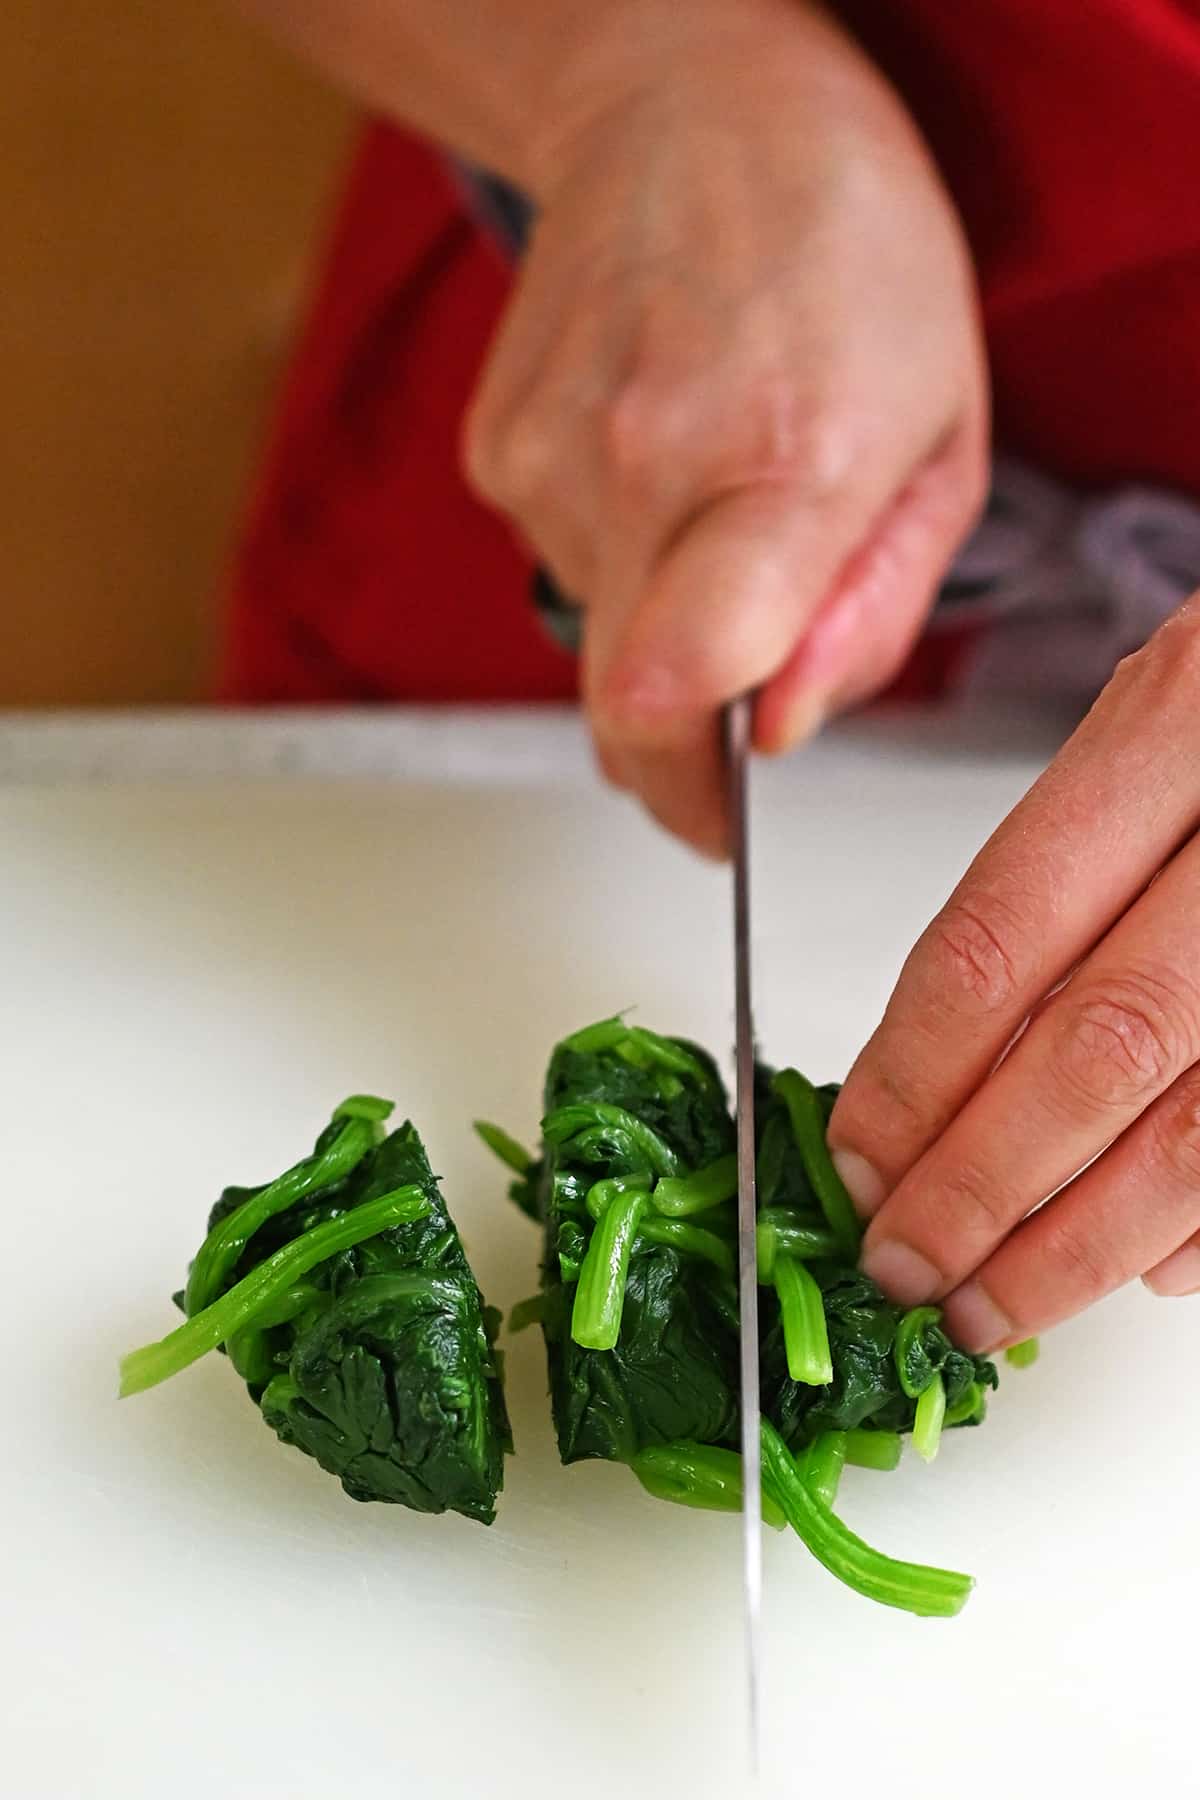 Cutting cooked and squeezed dry spinach into three sections with a chef's knife.